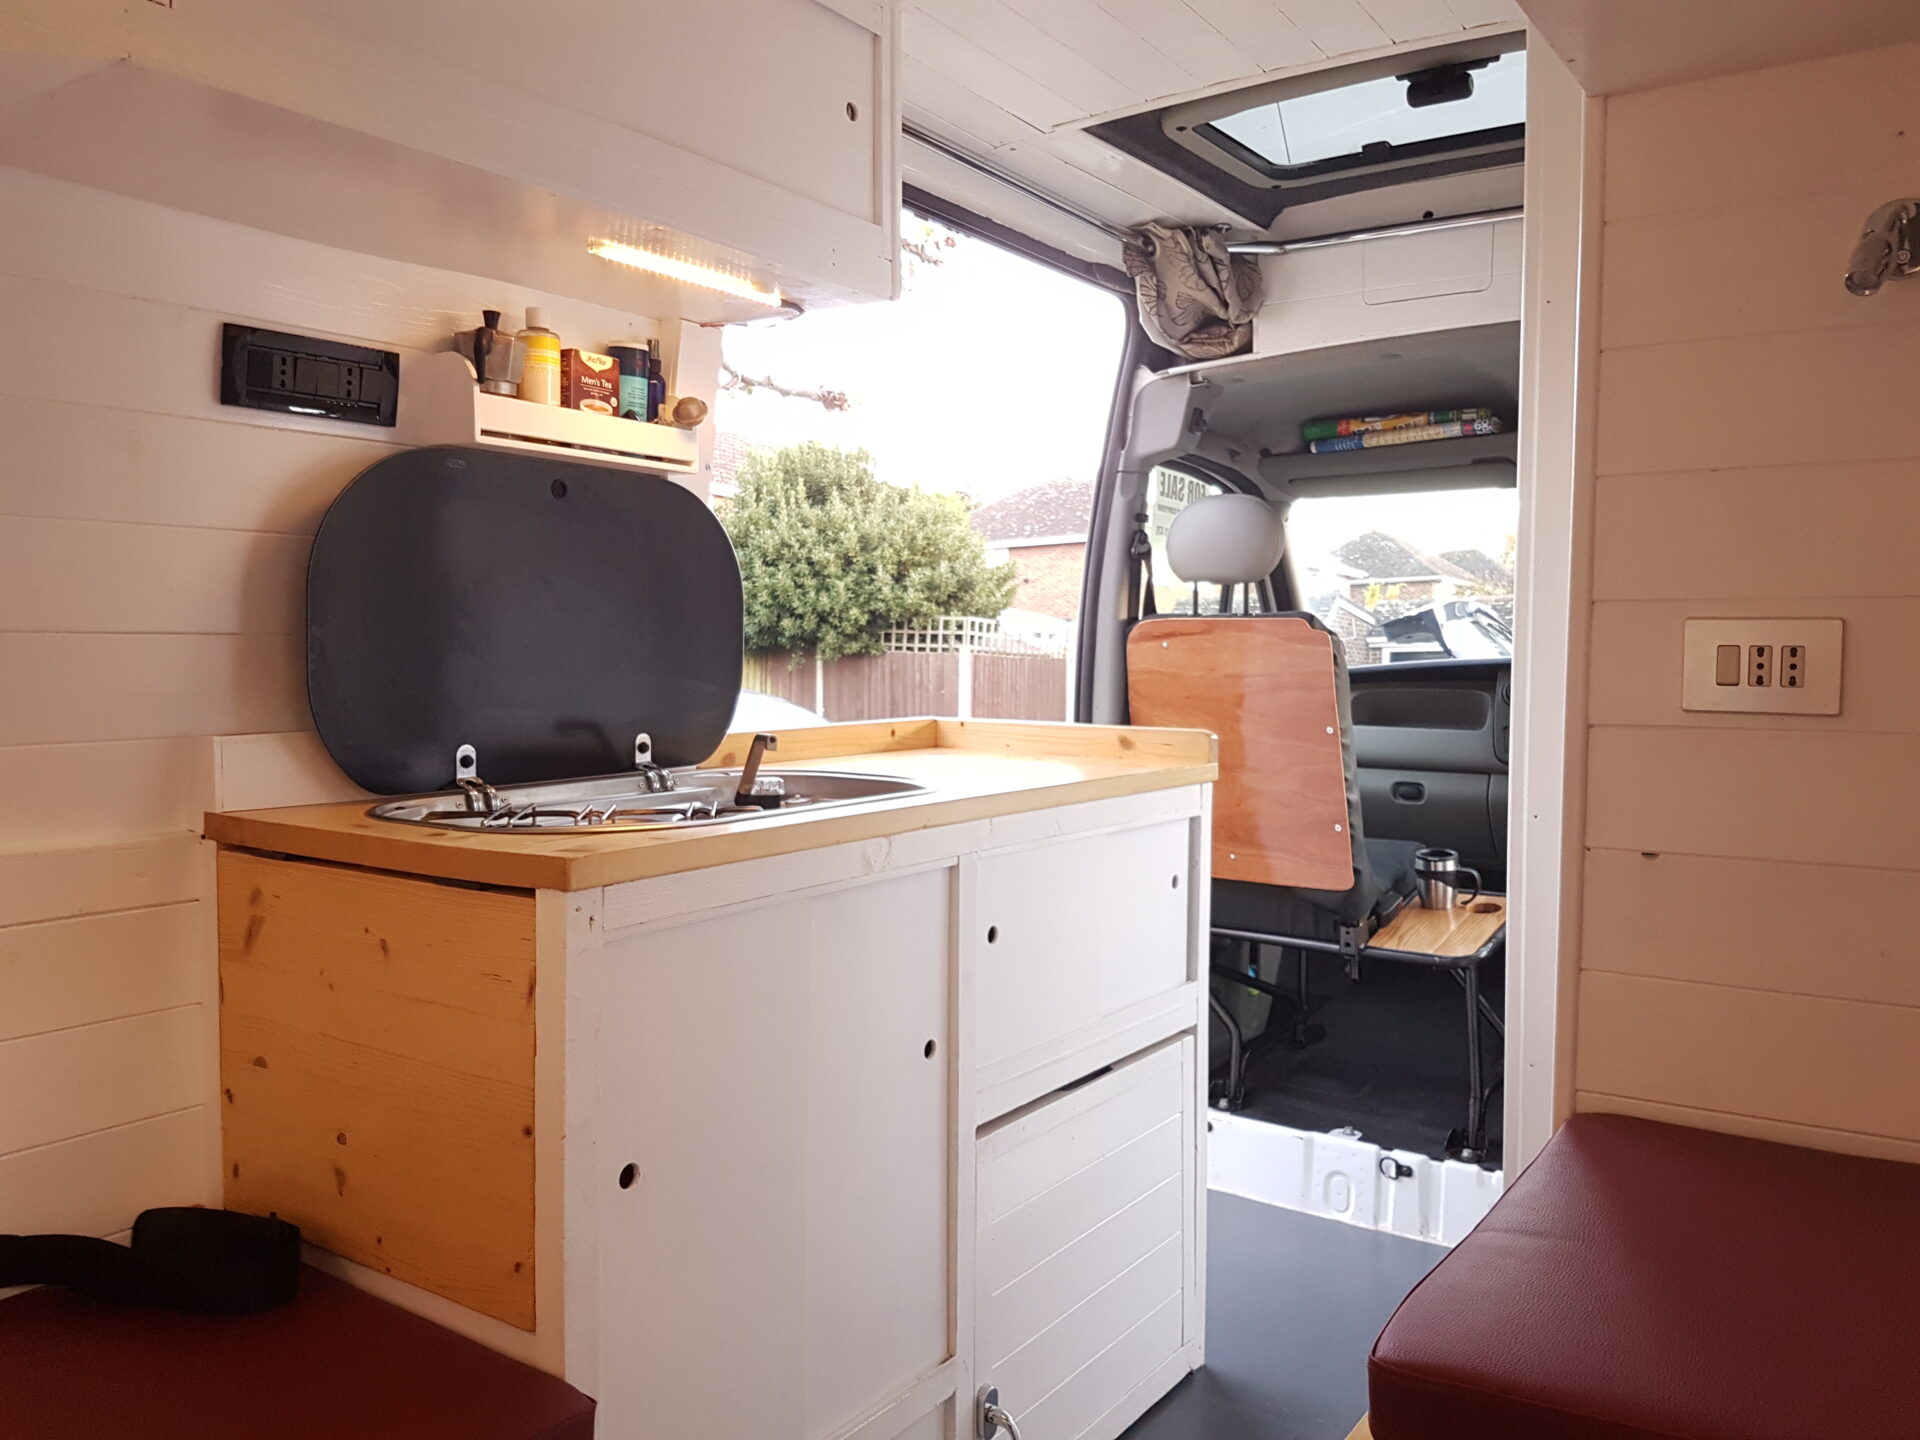 Does Jess the VW Campervan have off-grid 240 volt power and USB charge points?